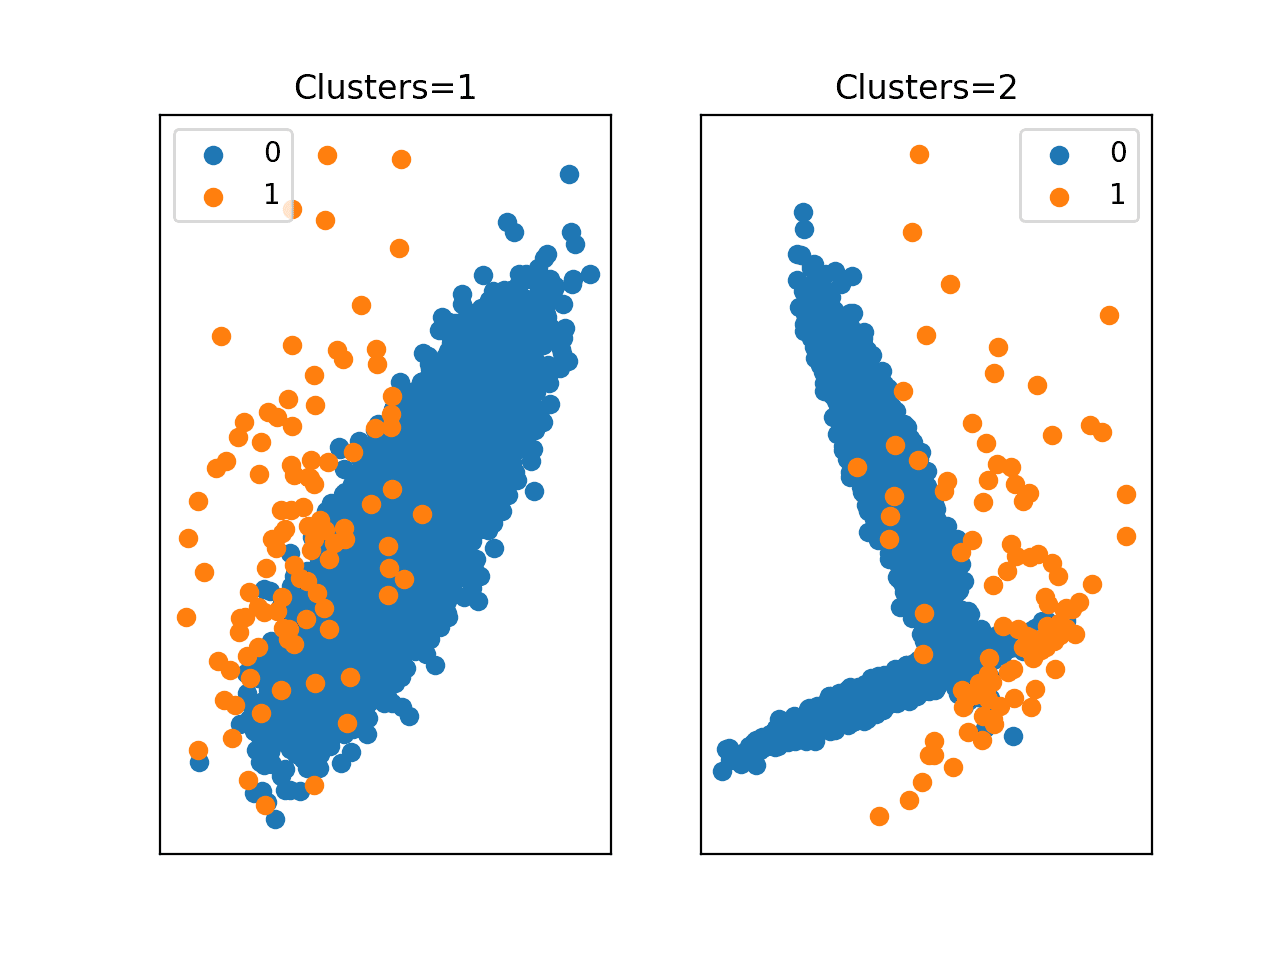 Scatter Plots of an Imbalanced Classification Dataset With Different Numbers of Clusters